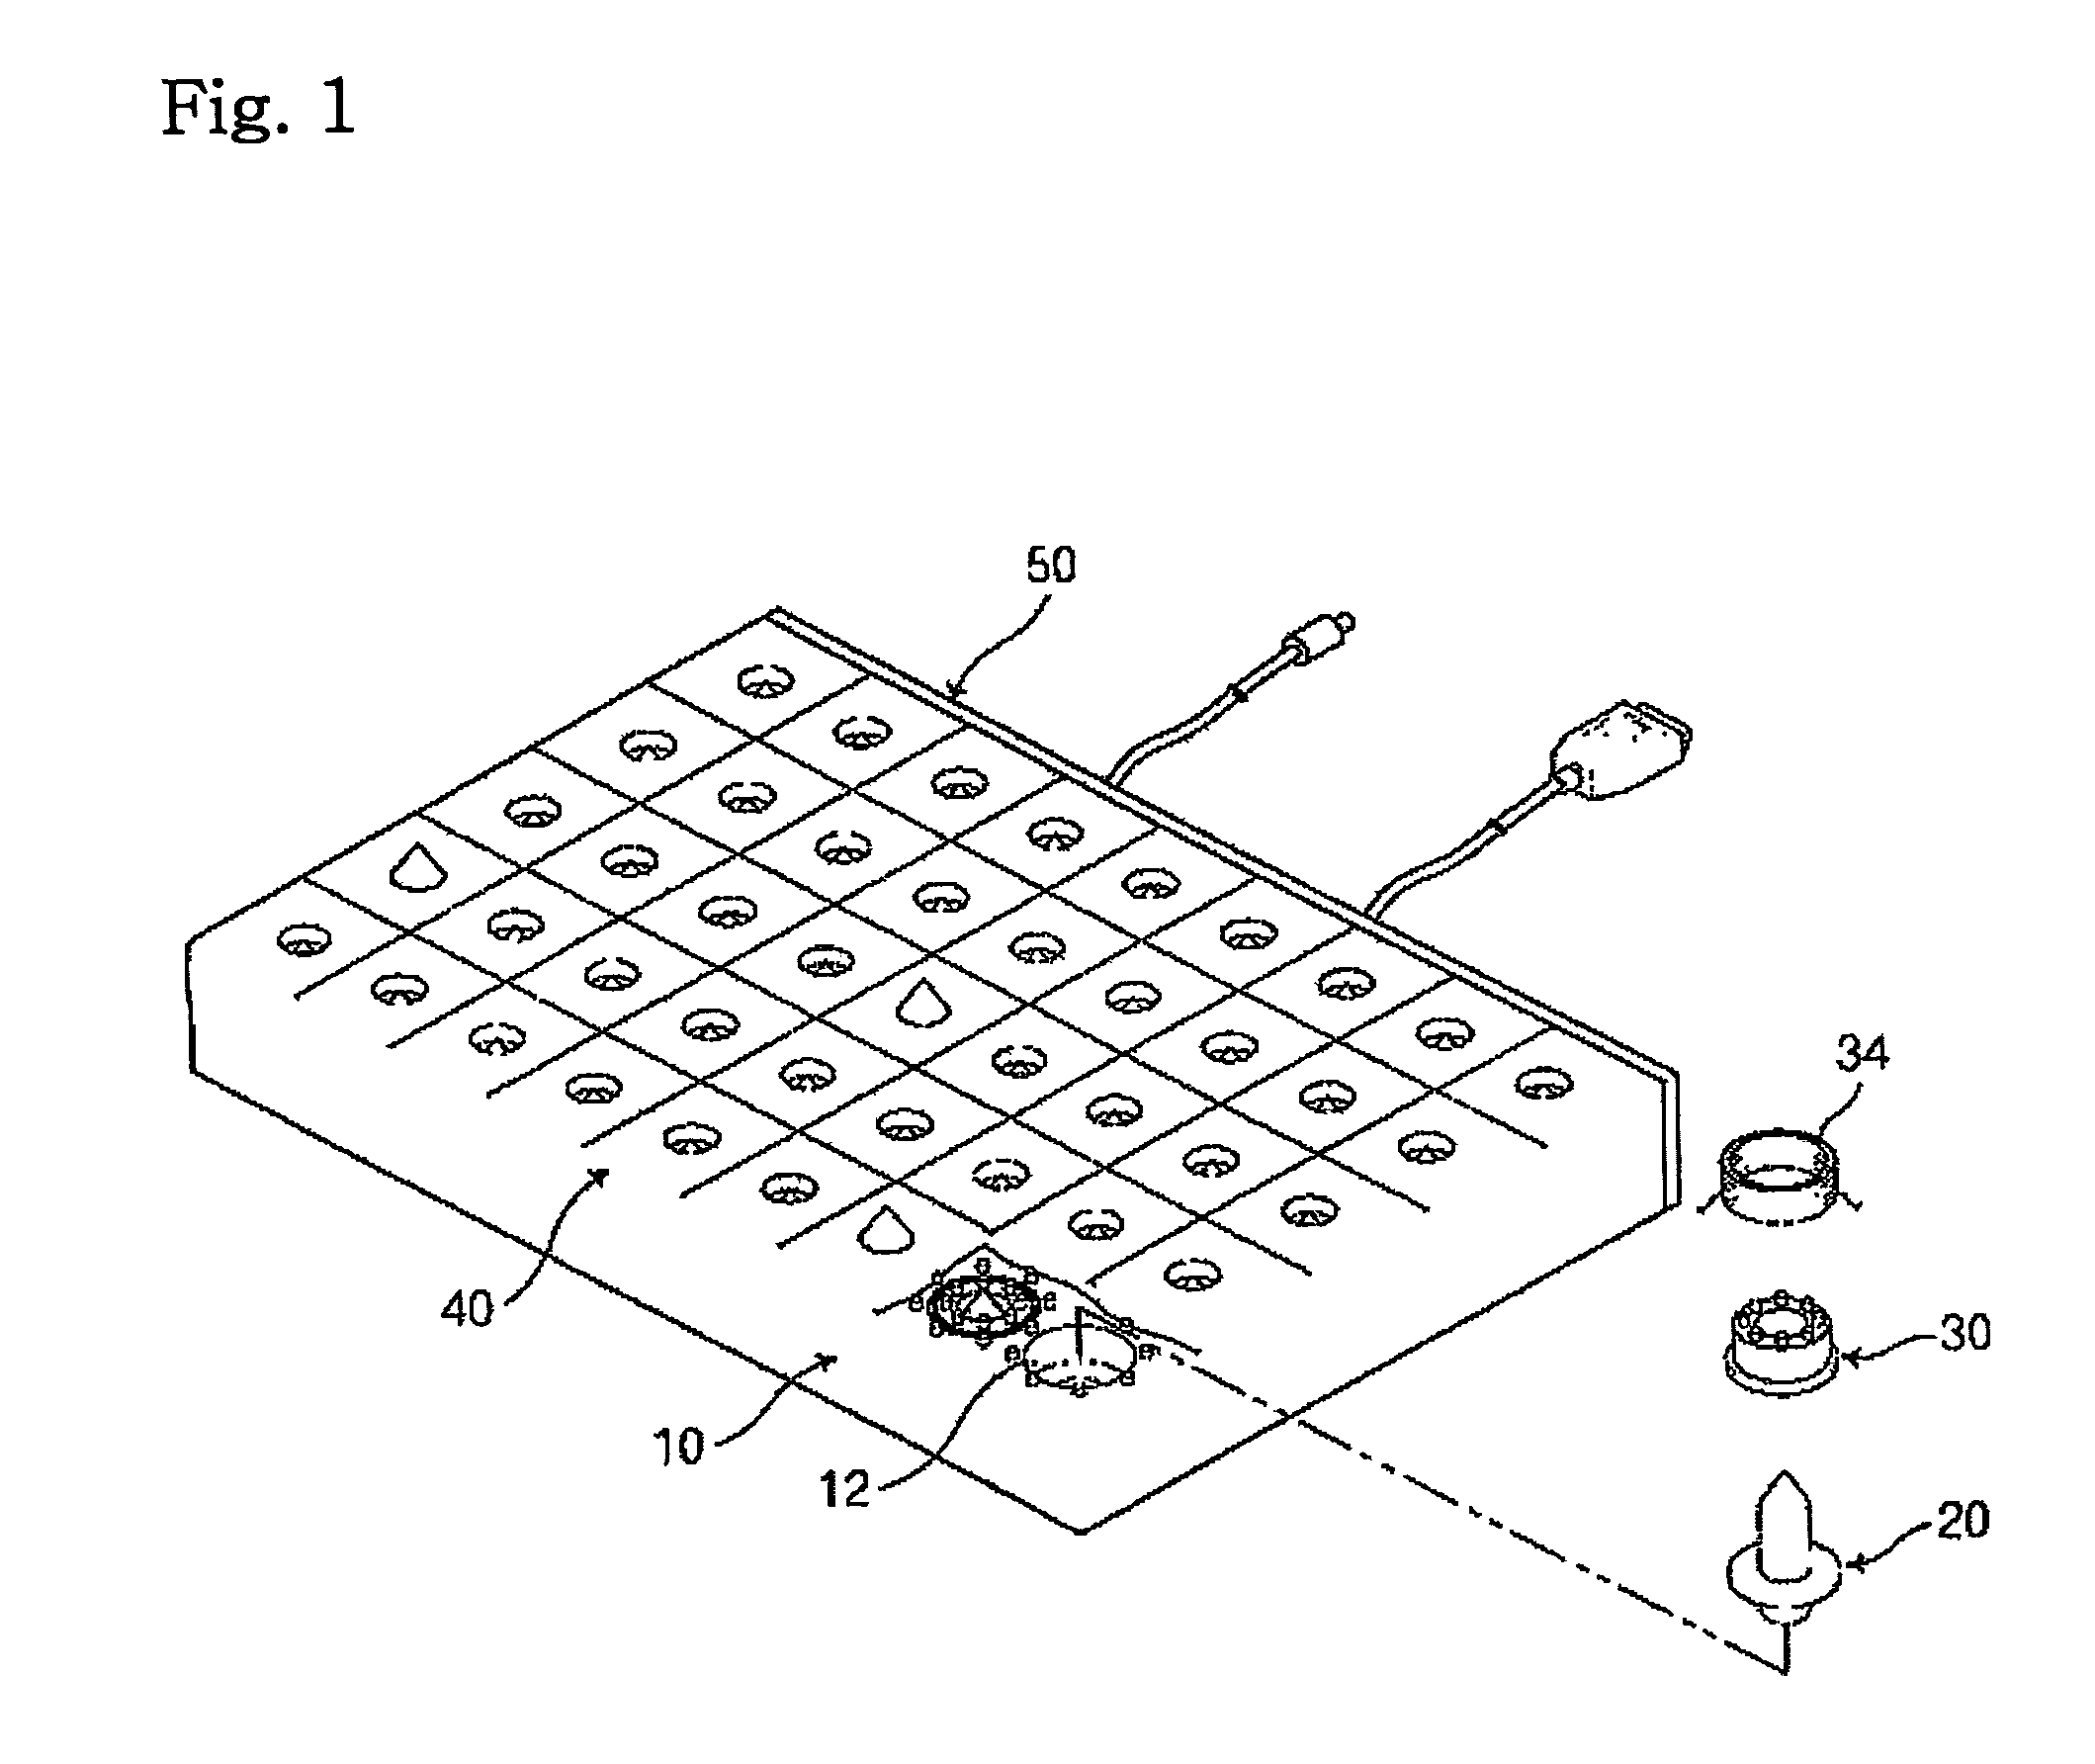 Display device of braille points